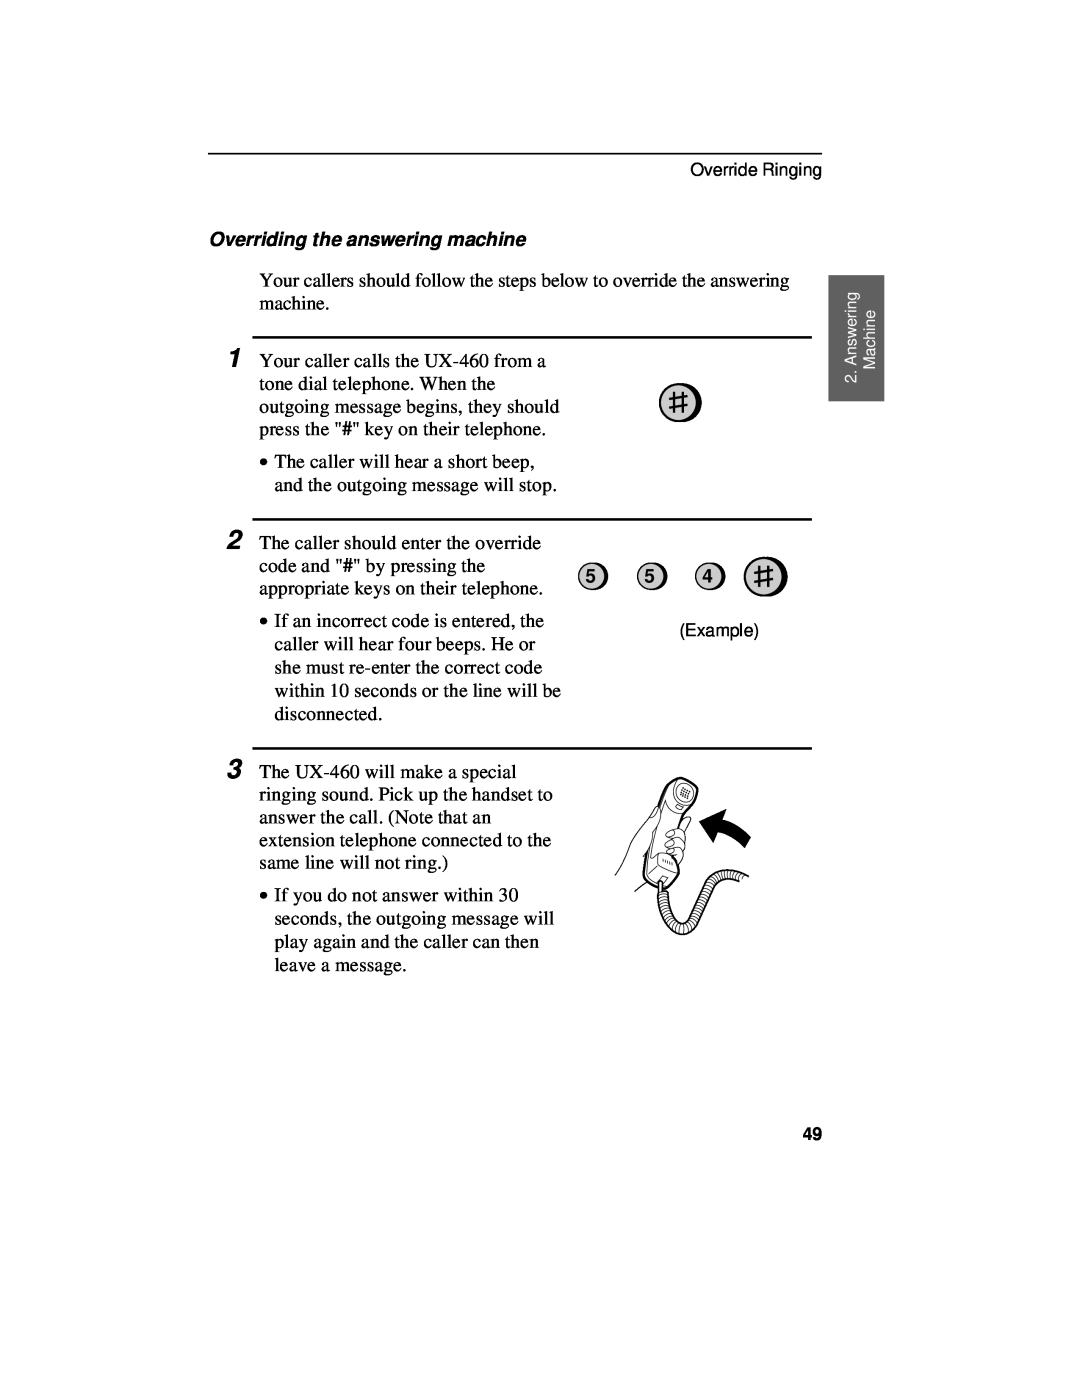 Sharp UX-460 operation manual Overriding the answering machine 